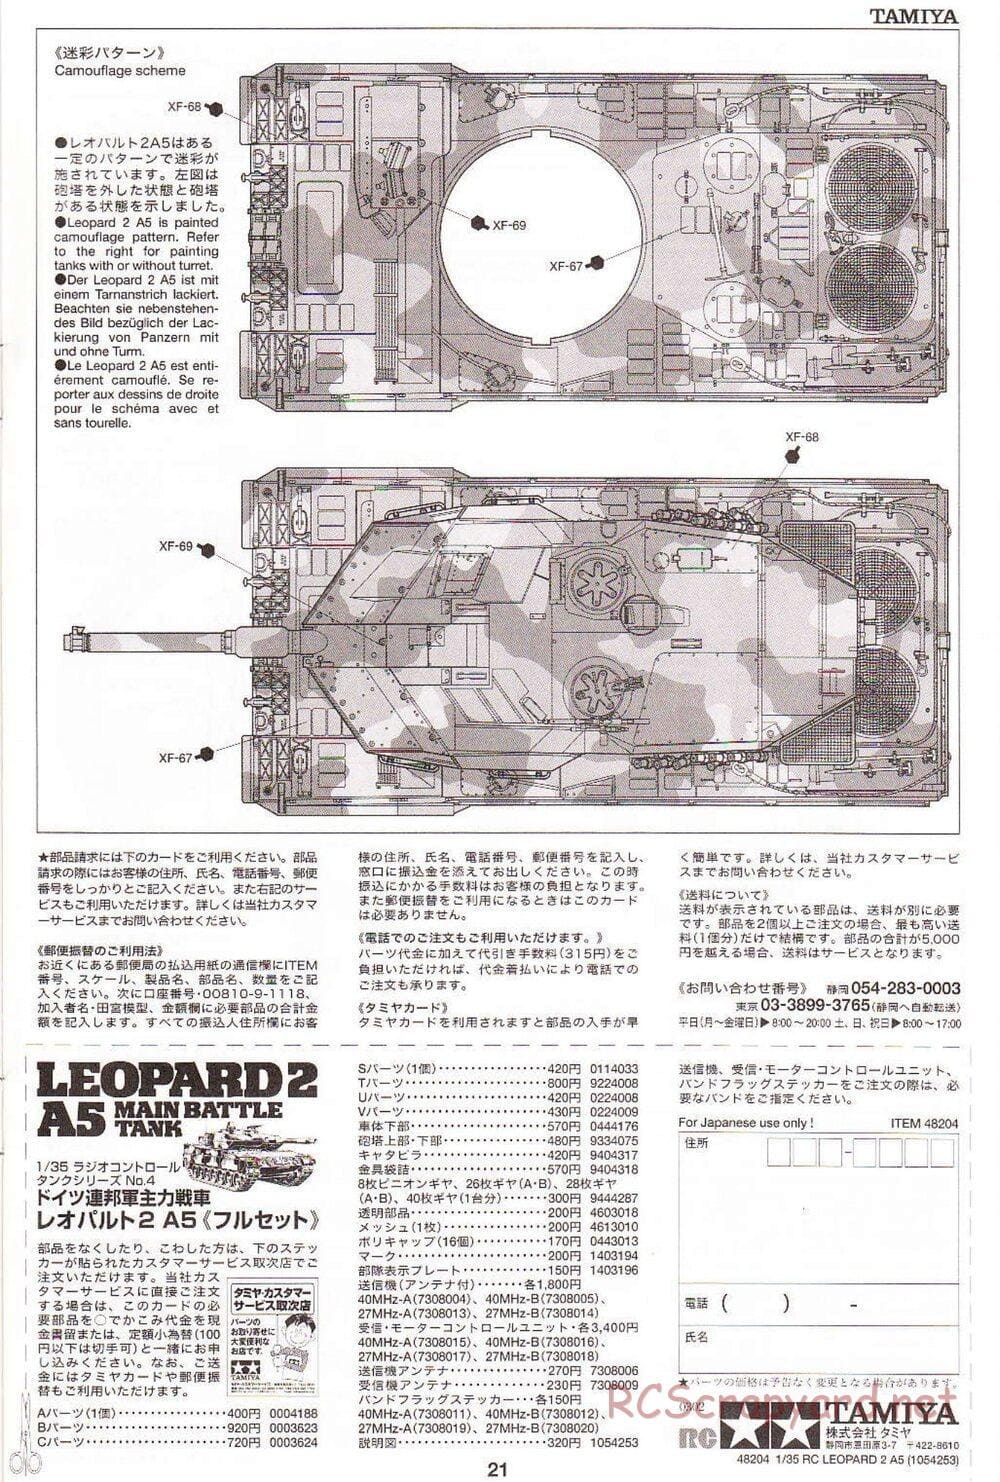 Tamiya - Leopard 2 A5 Main Battle Tank - 1/35 Scale Chassis - Manual - Page 22